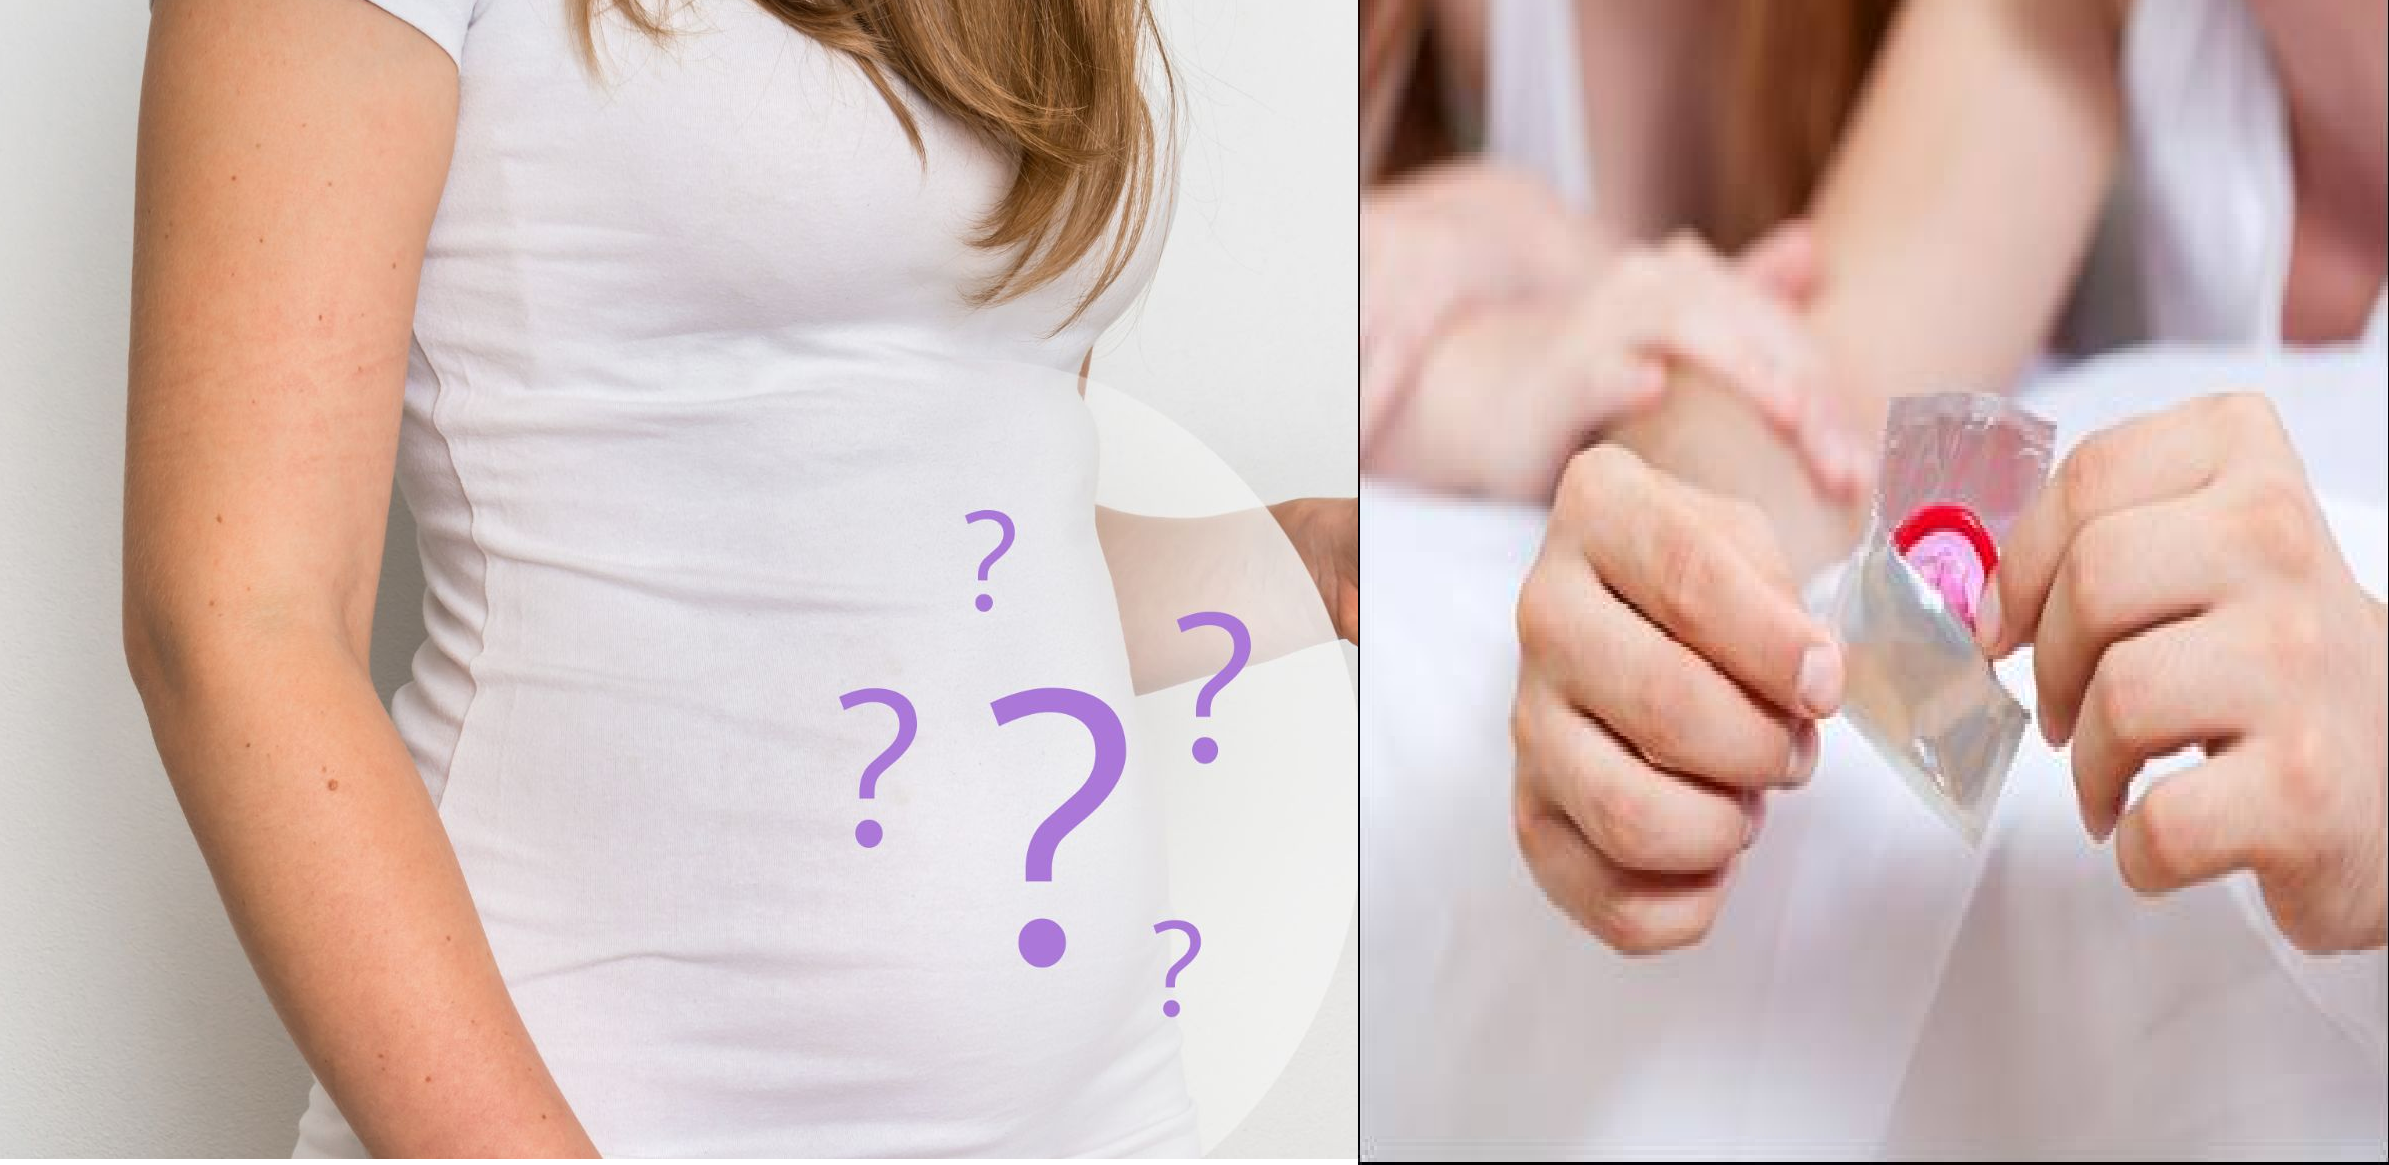 How to stop pregnancy without 'condom'? Read here now, otherwise don't regret it laterकंडोम